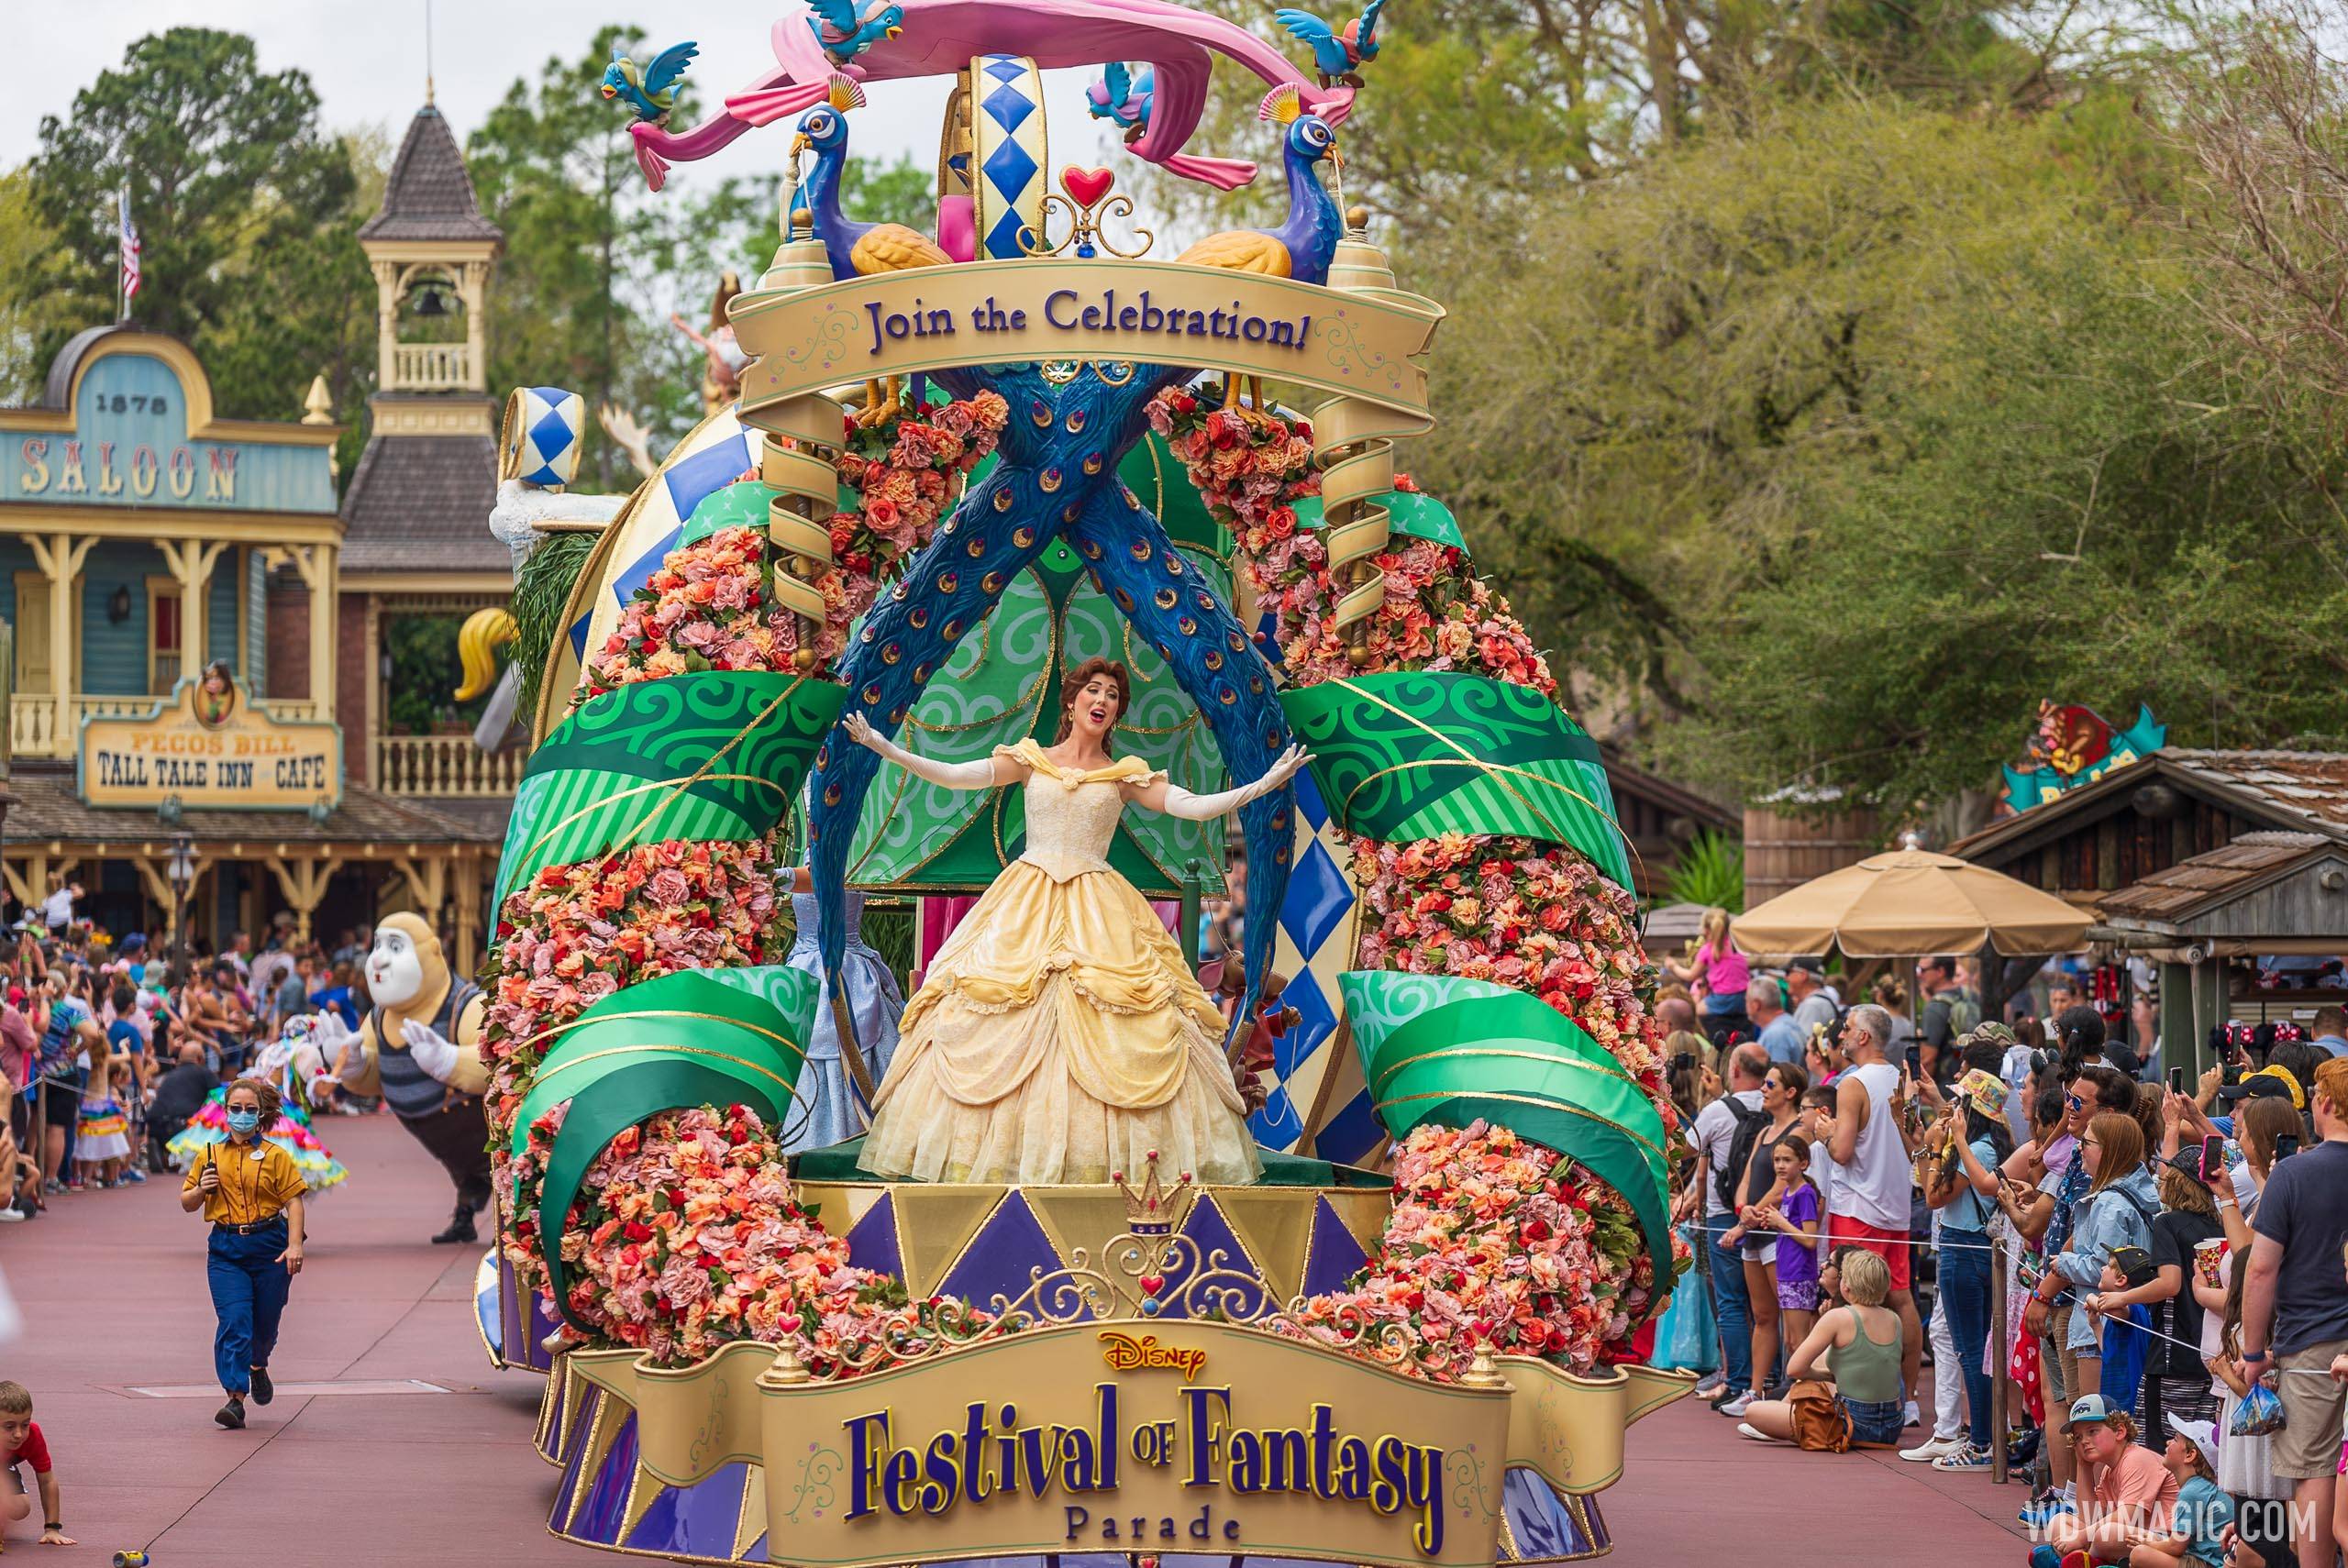 Disney Festival of Fantasy Parade will move to two performances daily from mod-November 2023